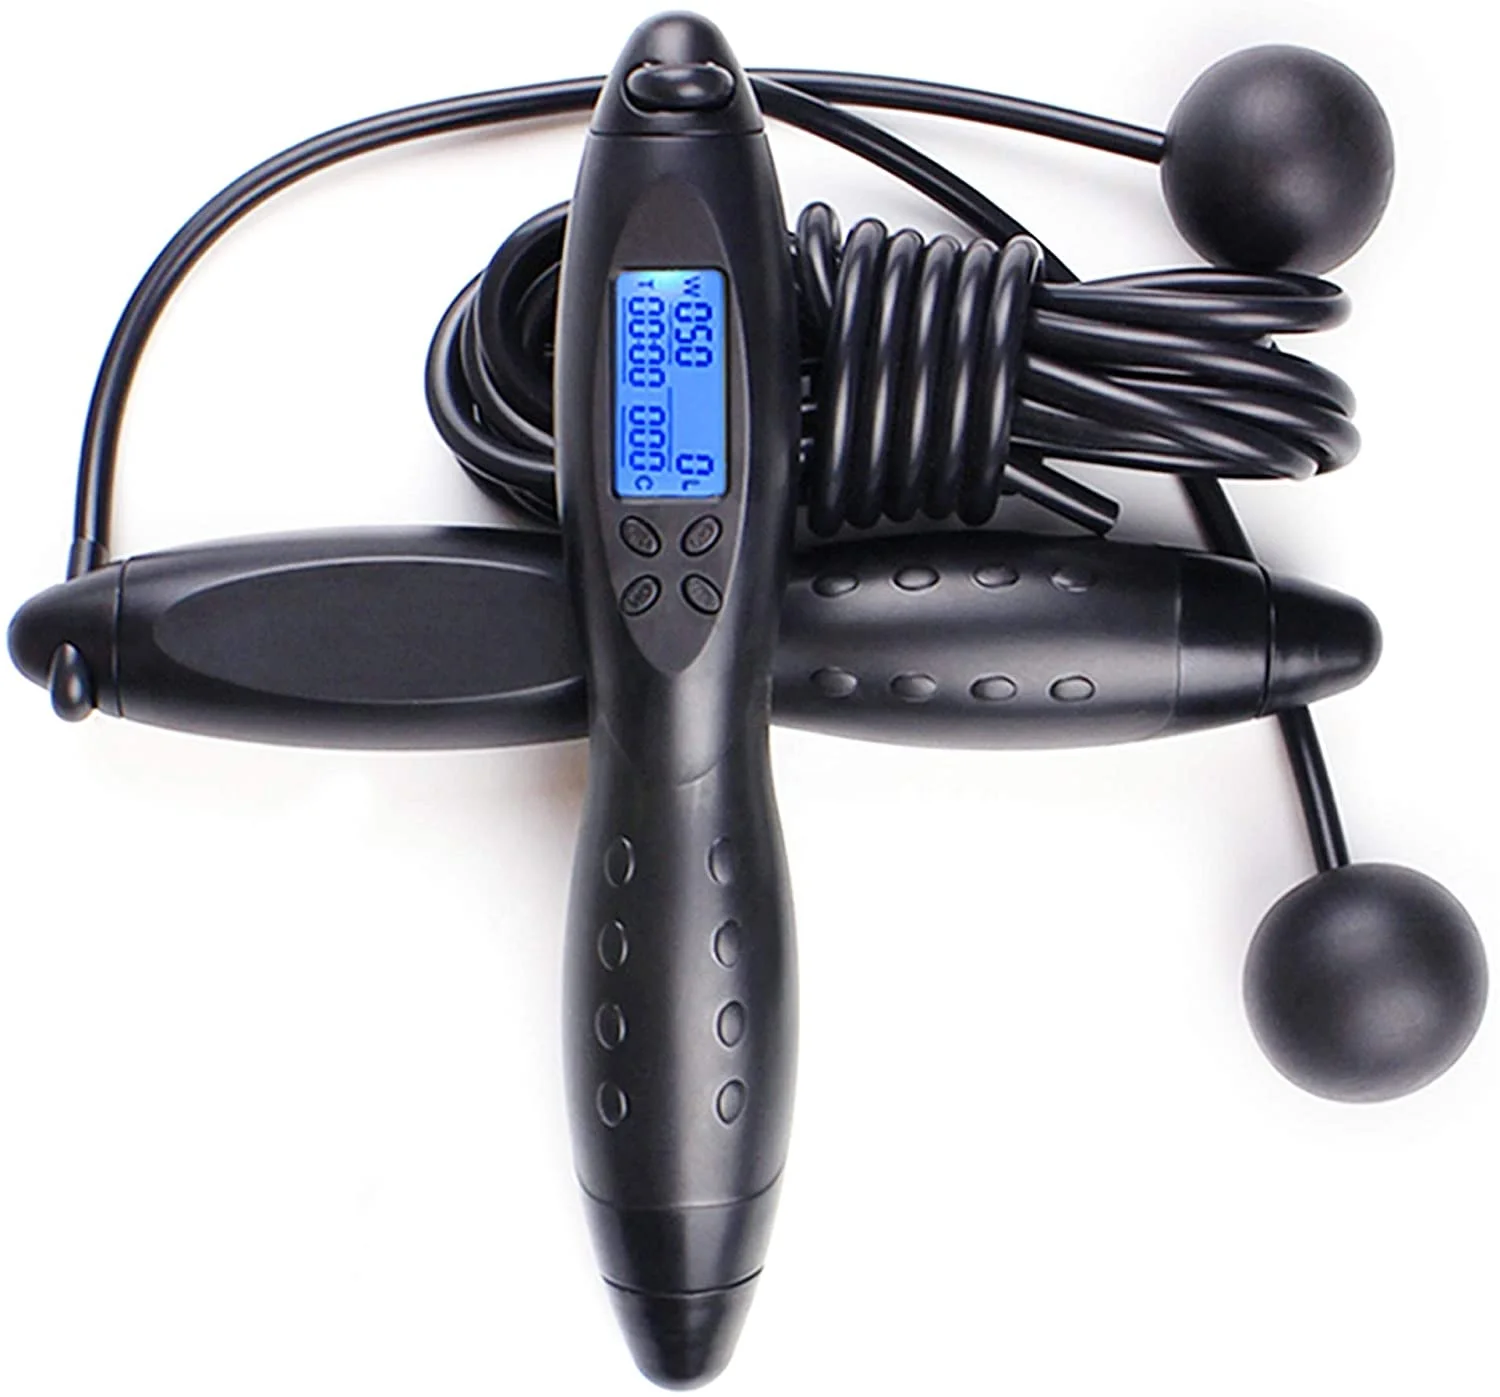 Jump Rope Digital Counting Adjustable Skipping Rope W/ Calorie Counter Fitness 